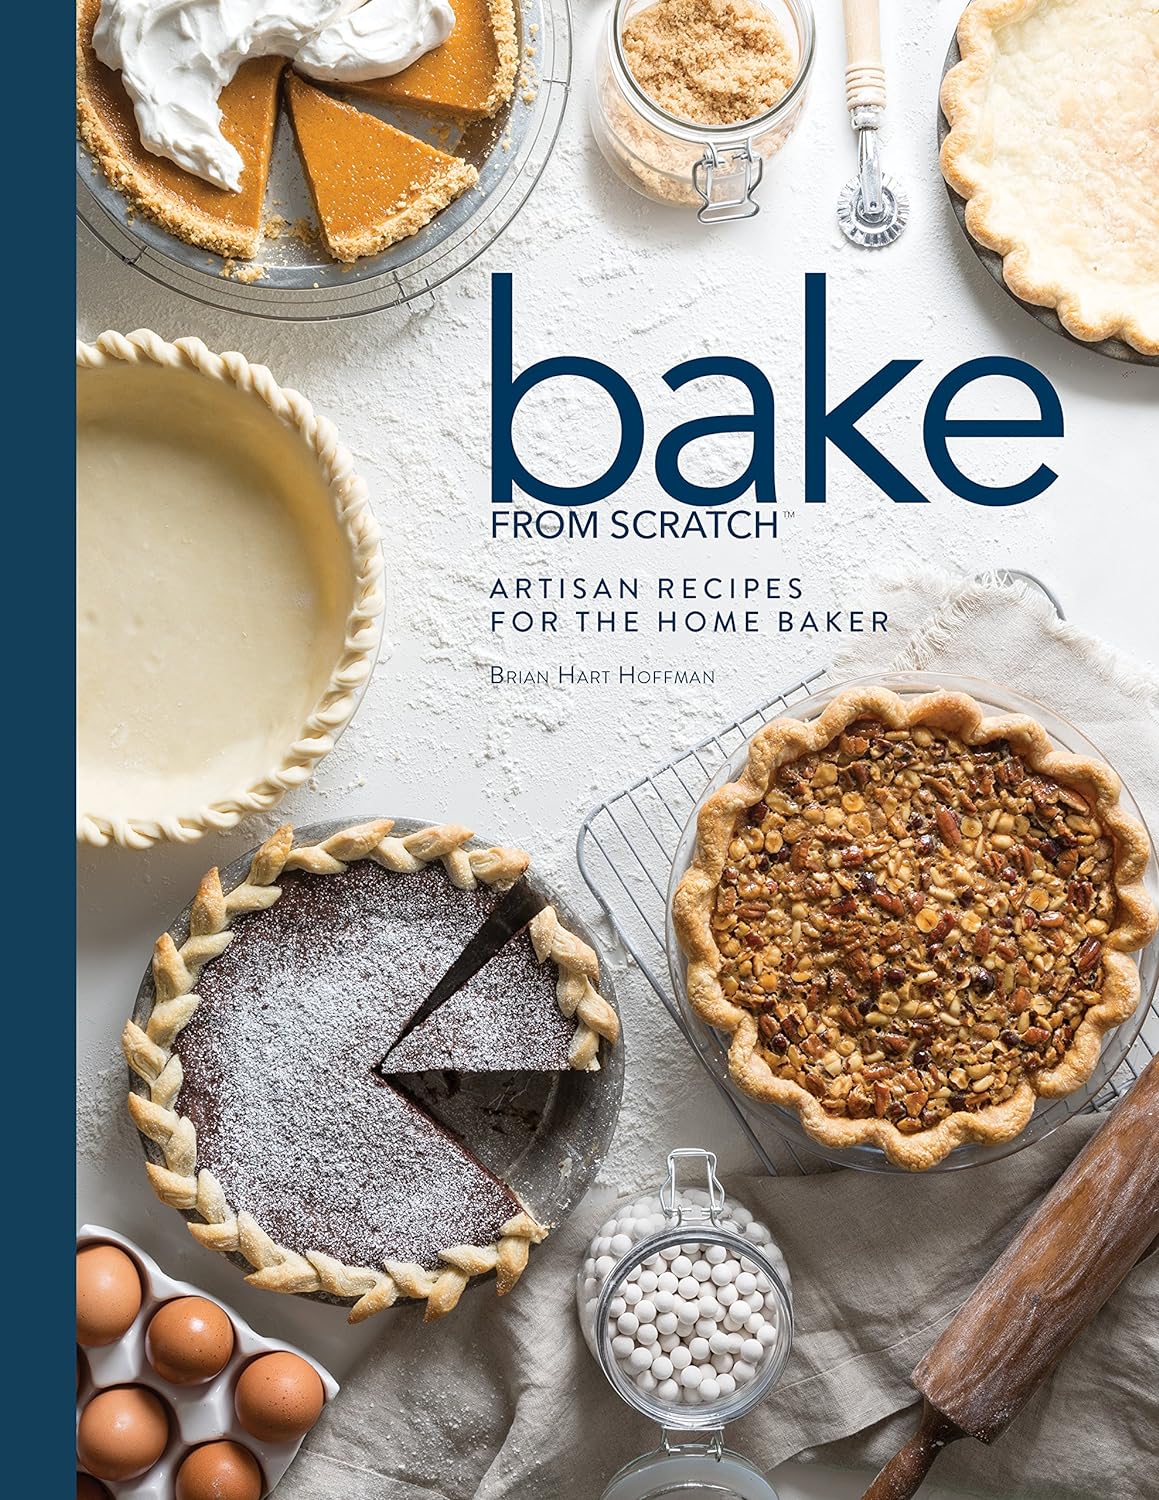 Hot Savings Alert - Bake from Scratch (Vol 2): Artisan Recipes for the Home Baker - Limited-Time Specials!